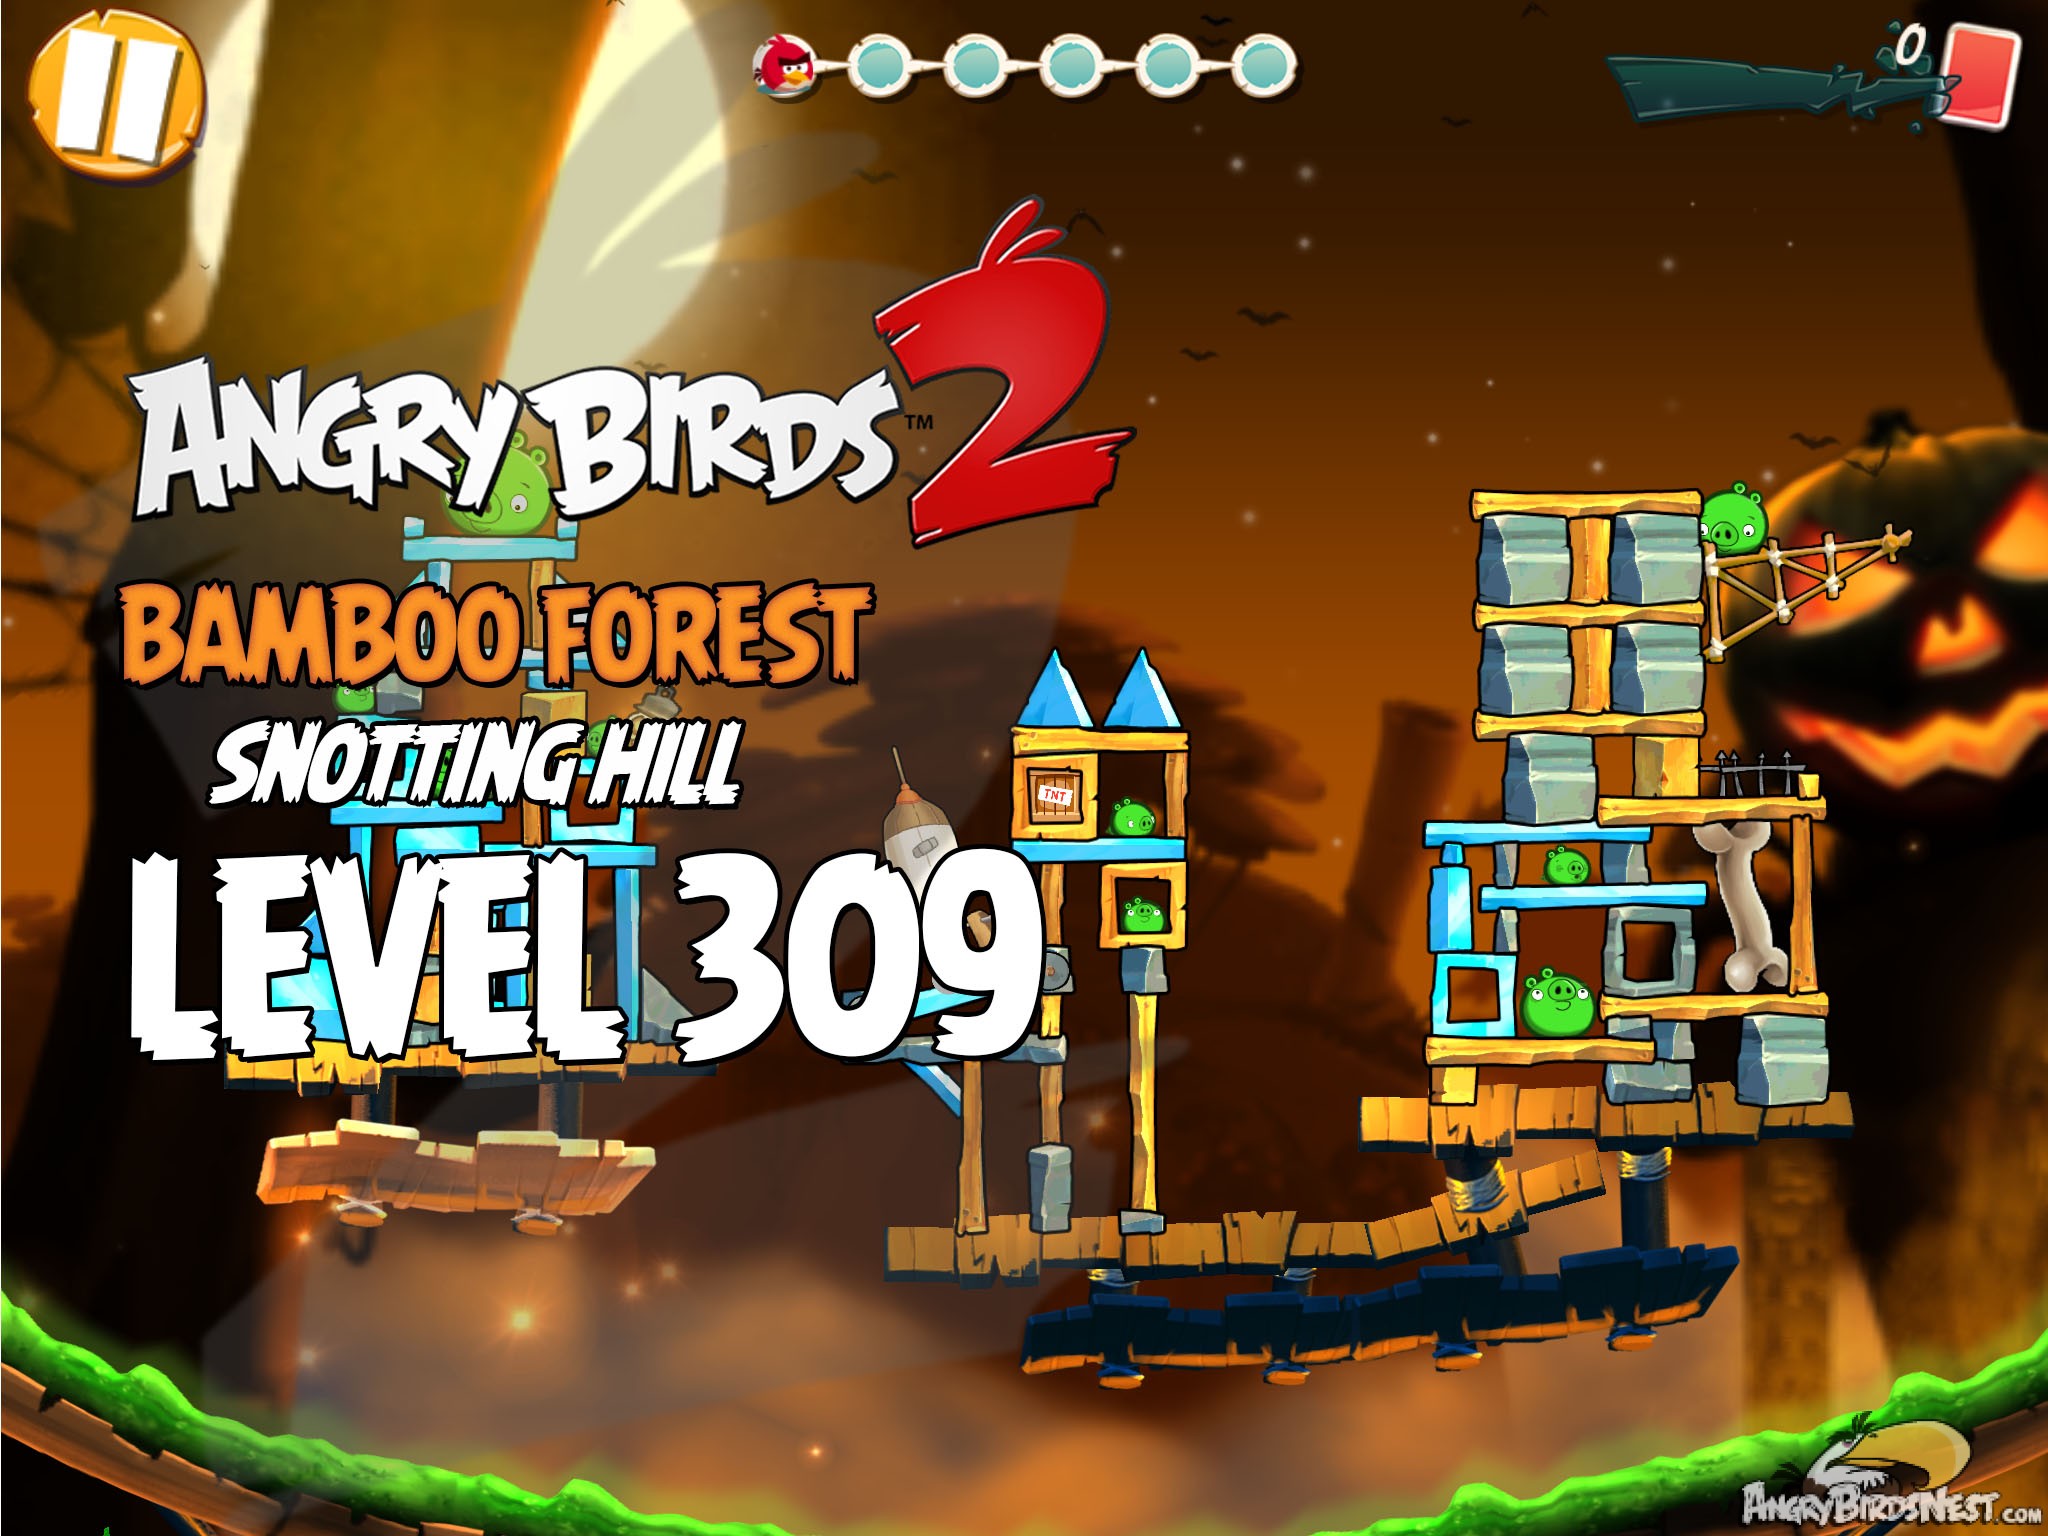 Angry Birds 2 Bamboo Forest Snotting Hill Level 309